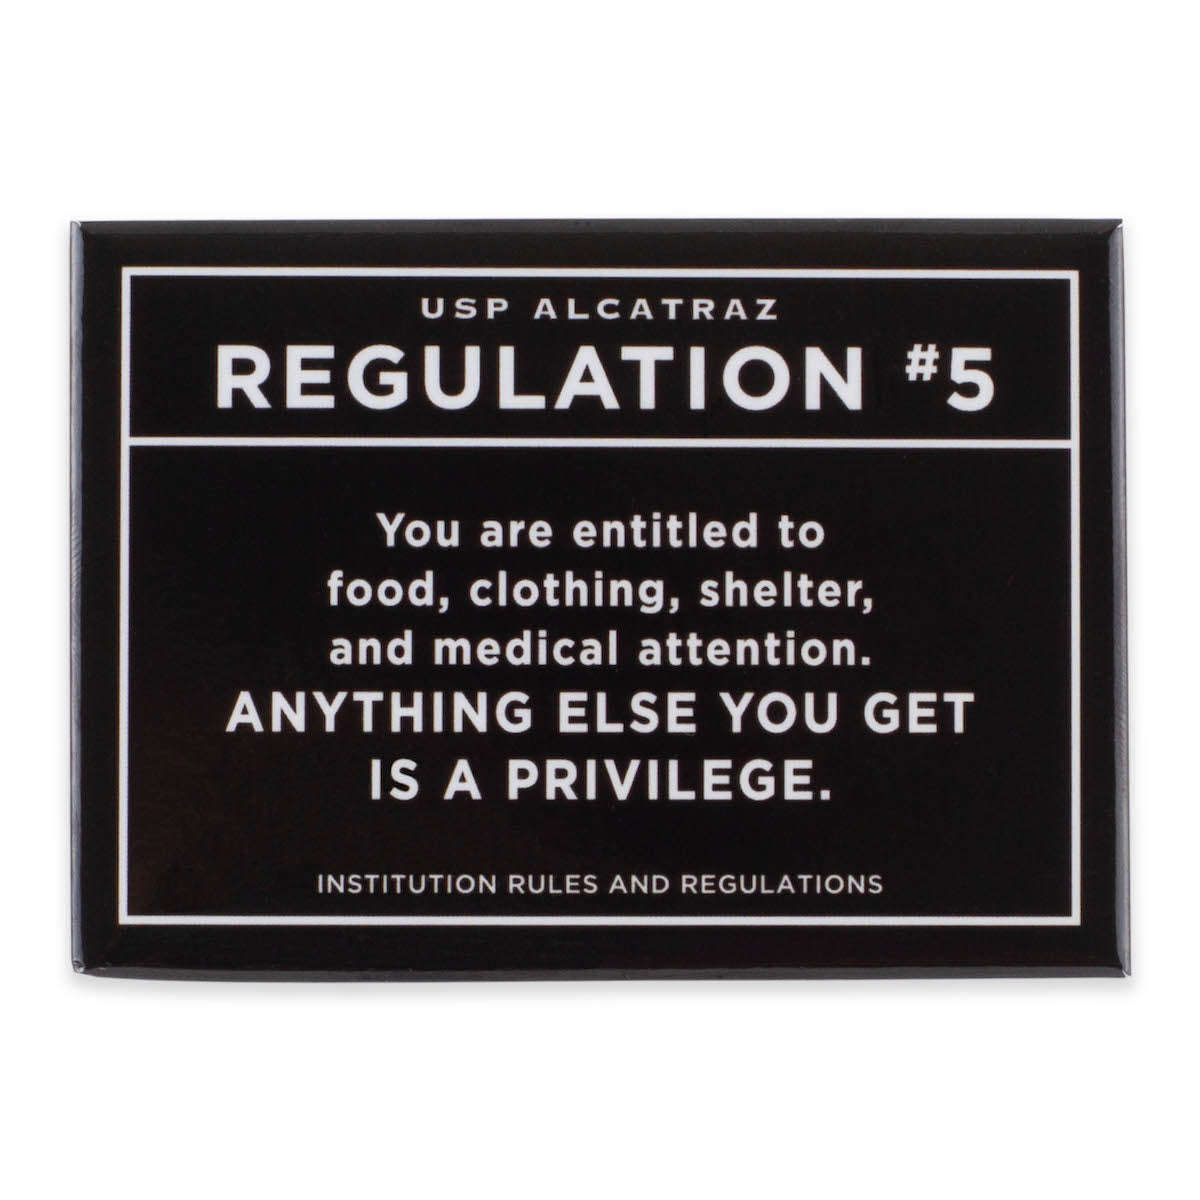 Rectangular black magnet with text from U.S. Penitentiary Alcatraz Regulation 5 in white: “You are entitled to food, clothing, shelter, and medical attention. Anything else you get is a privilege.”